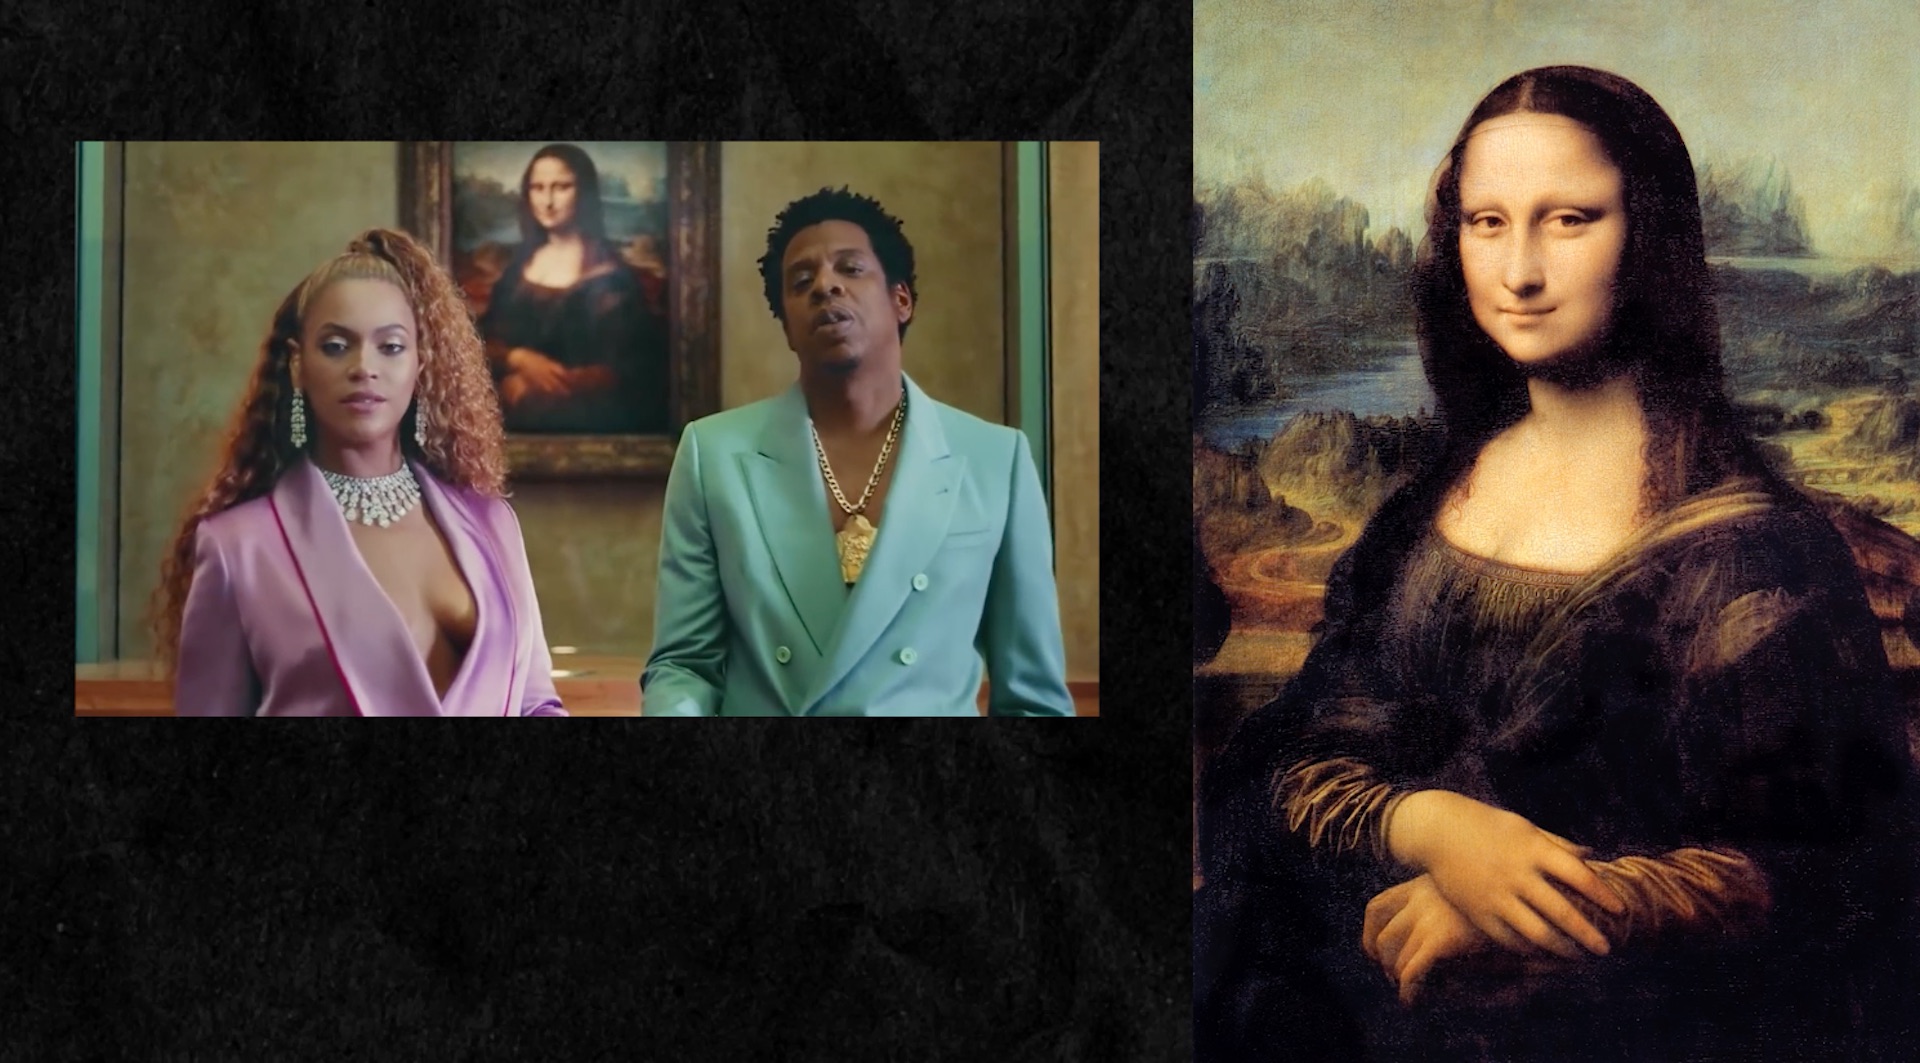 Monalesa Xxx Video In - Stunting on the Louvre: BeyoncÃ©, Jay-Z and the art of swagger - The  Washington Post